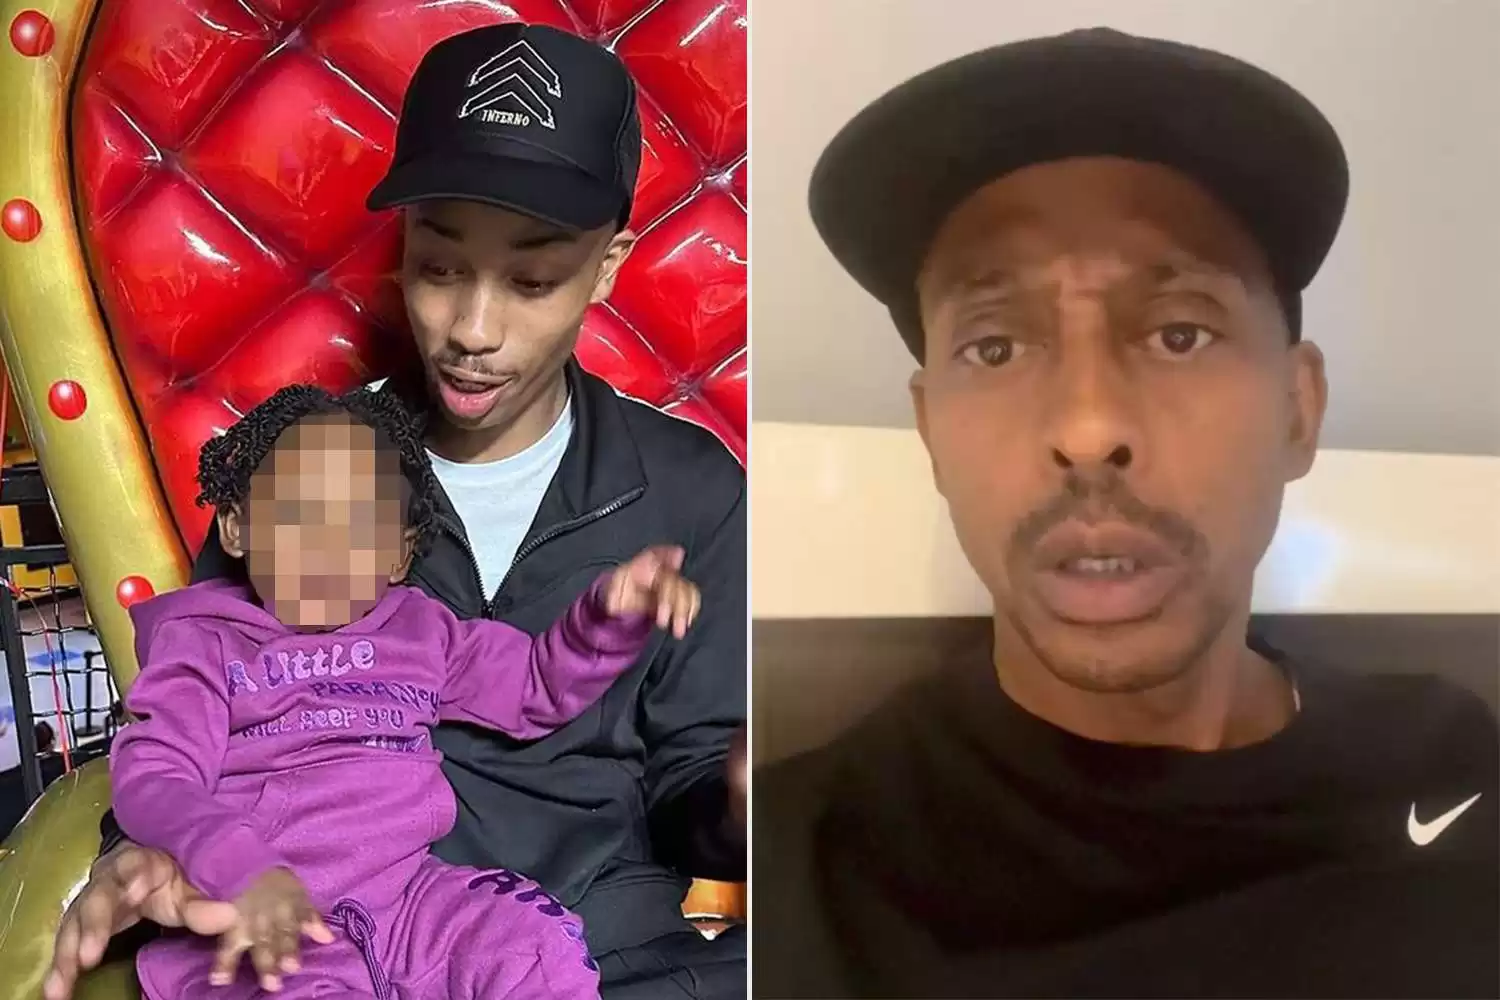 Philadelphia Shooting Claims the Life of YNG Cheese, the Son of Podcast Host and Rapper Gillie Da Kid